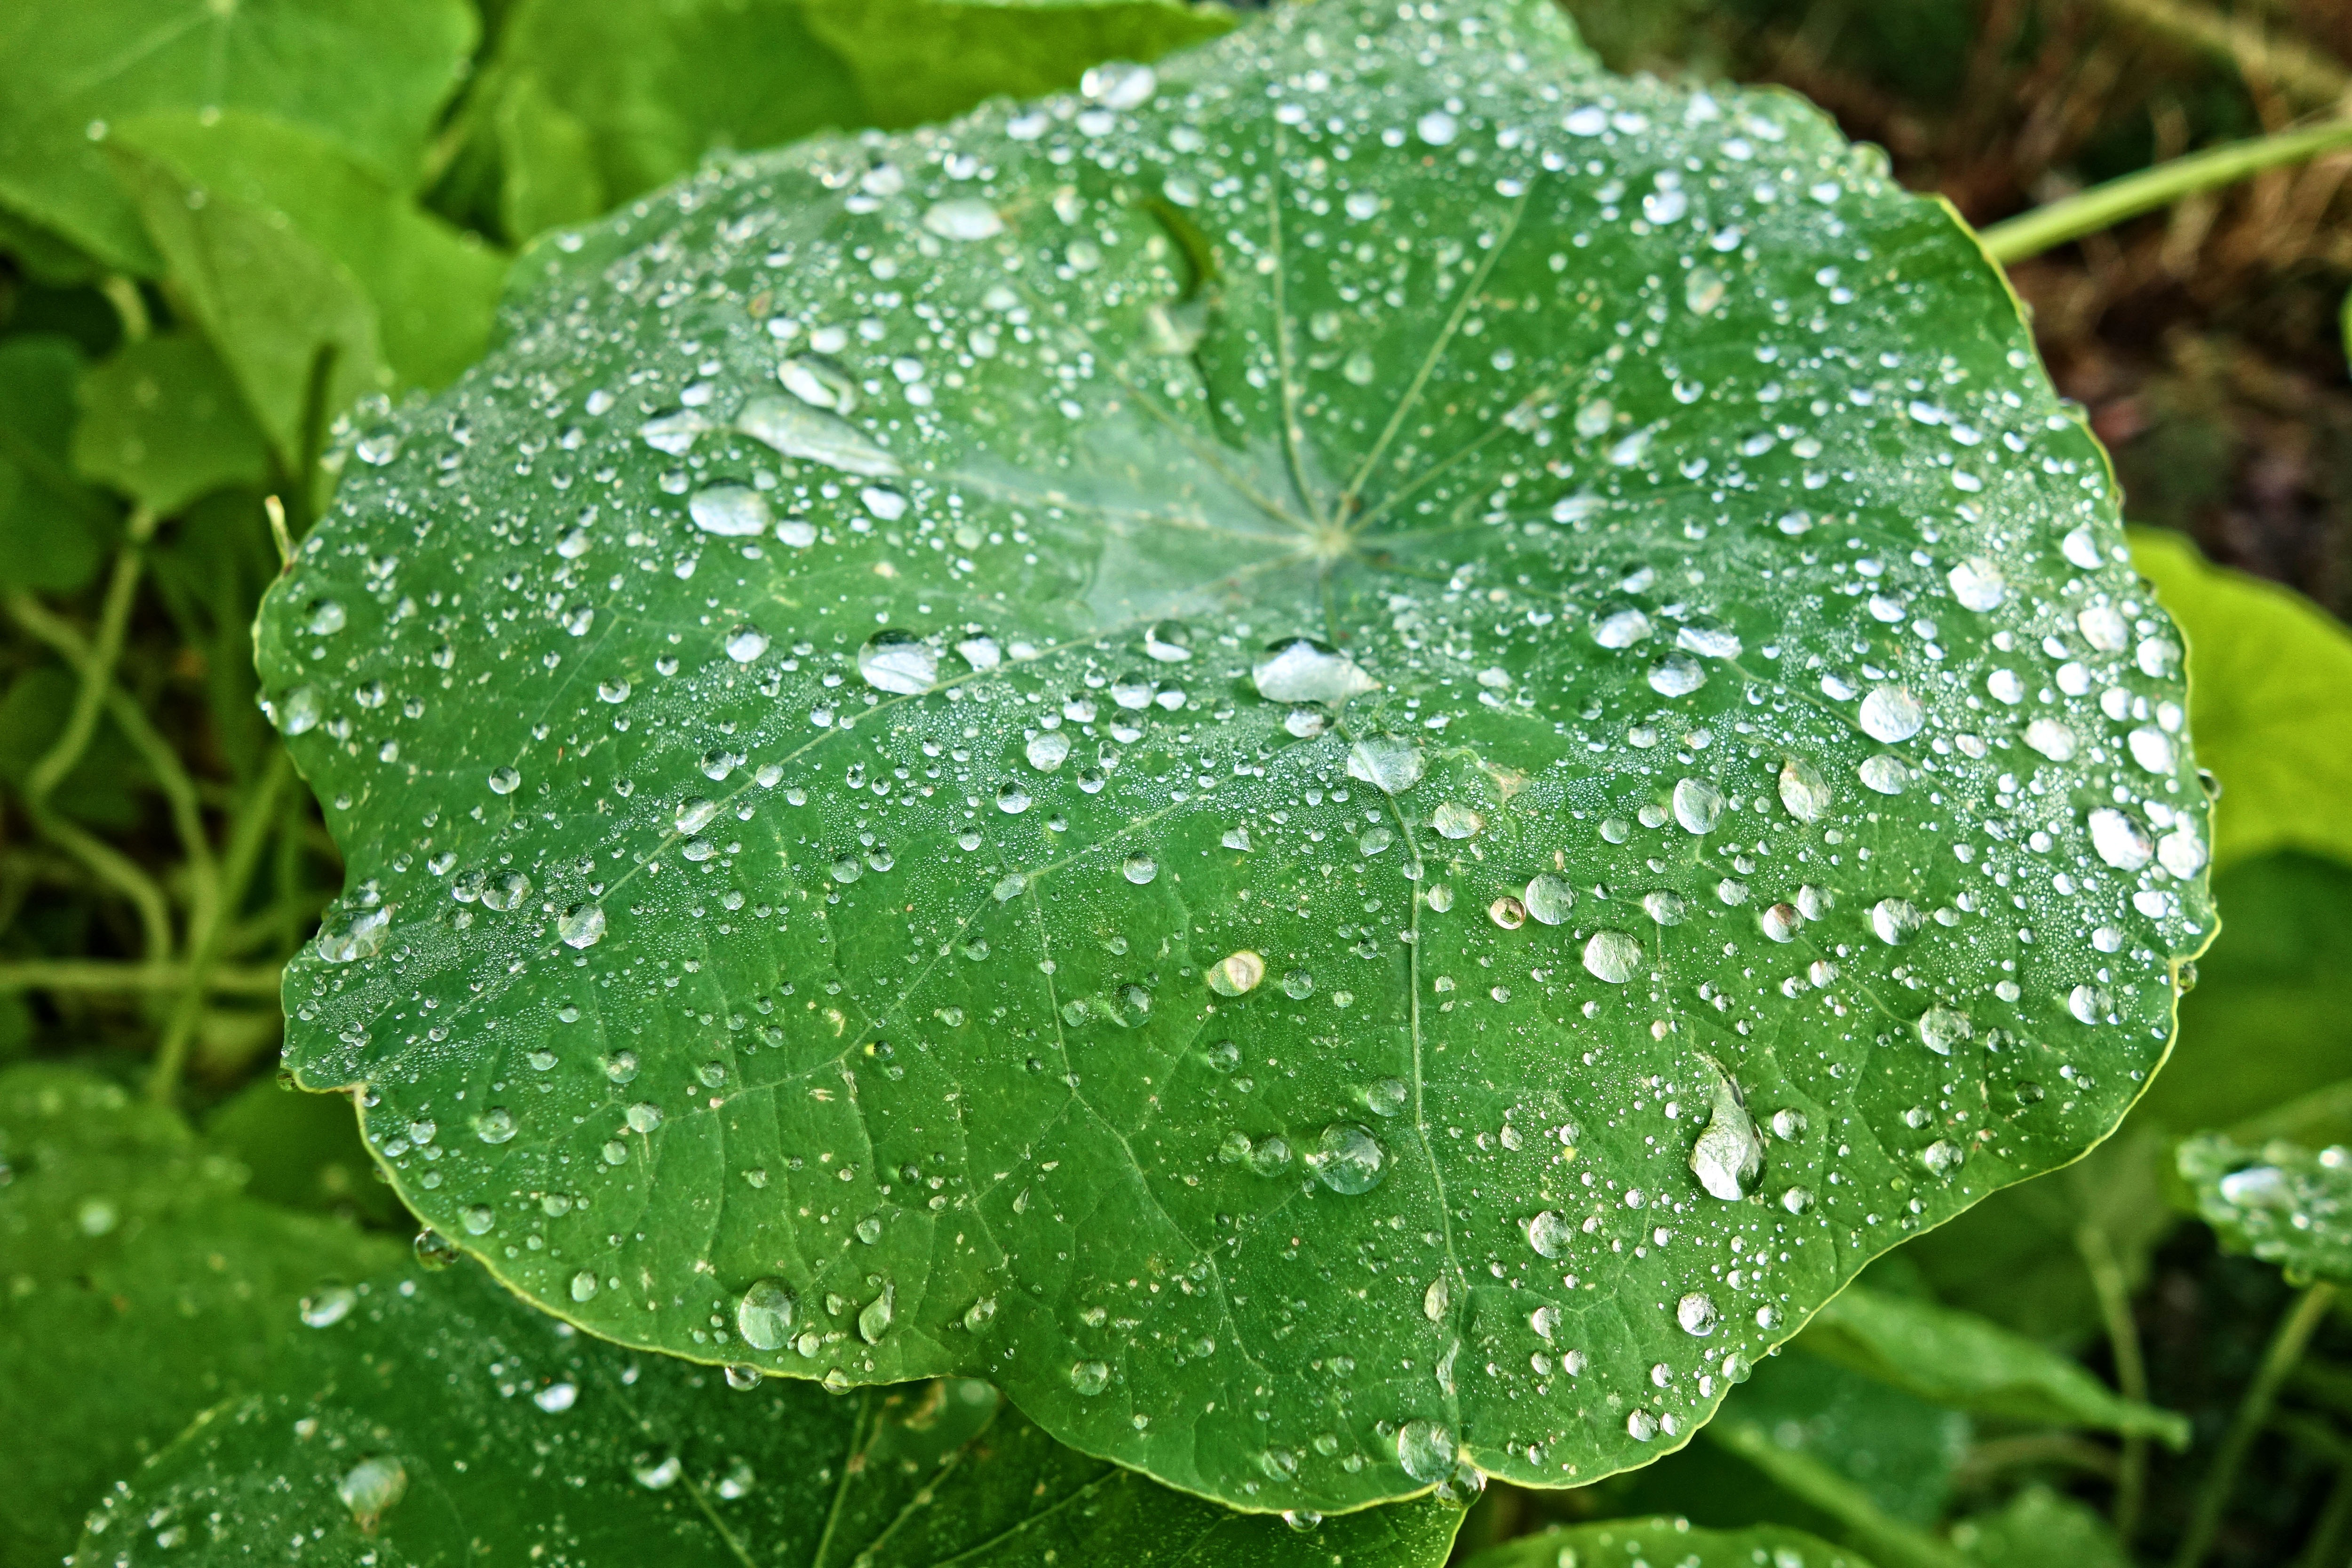 Water on a green leaf image - Free stock photo - Public Domain photo ...